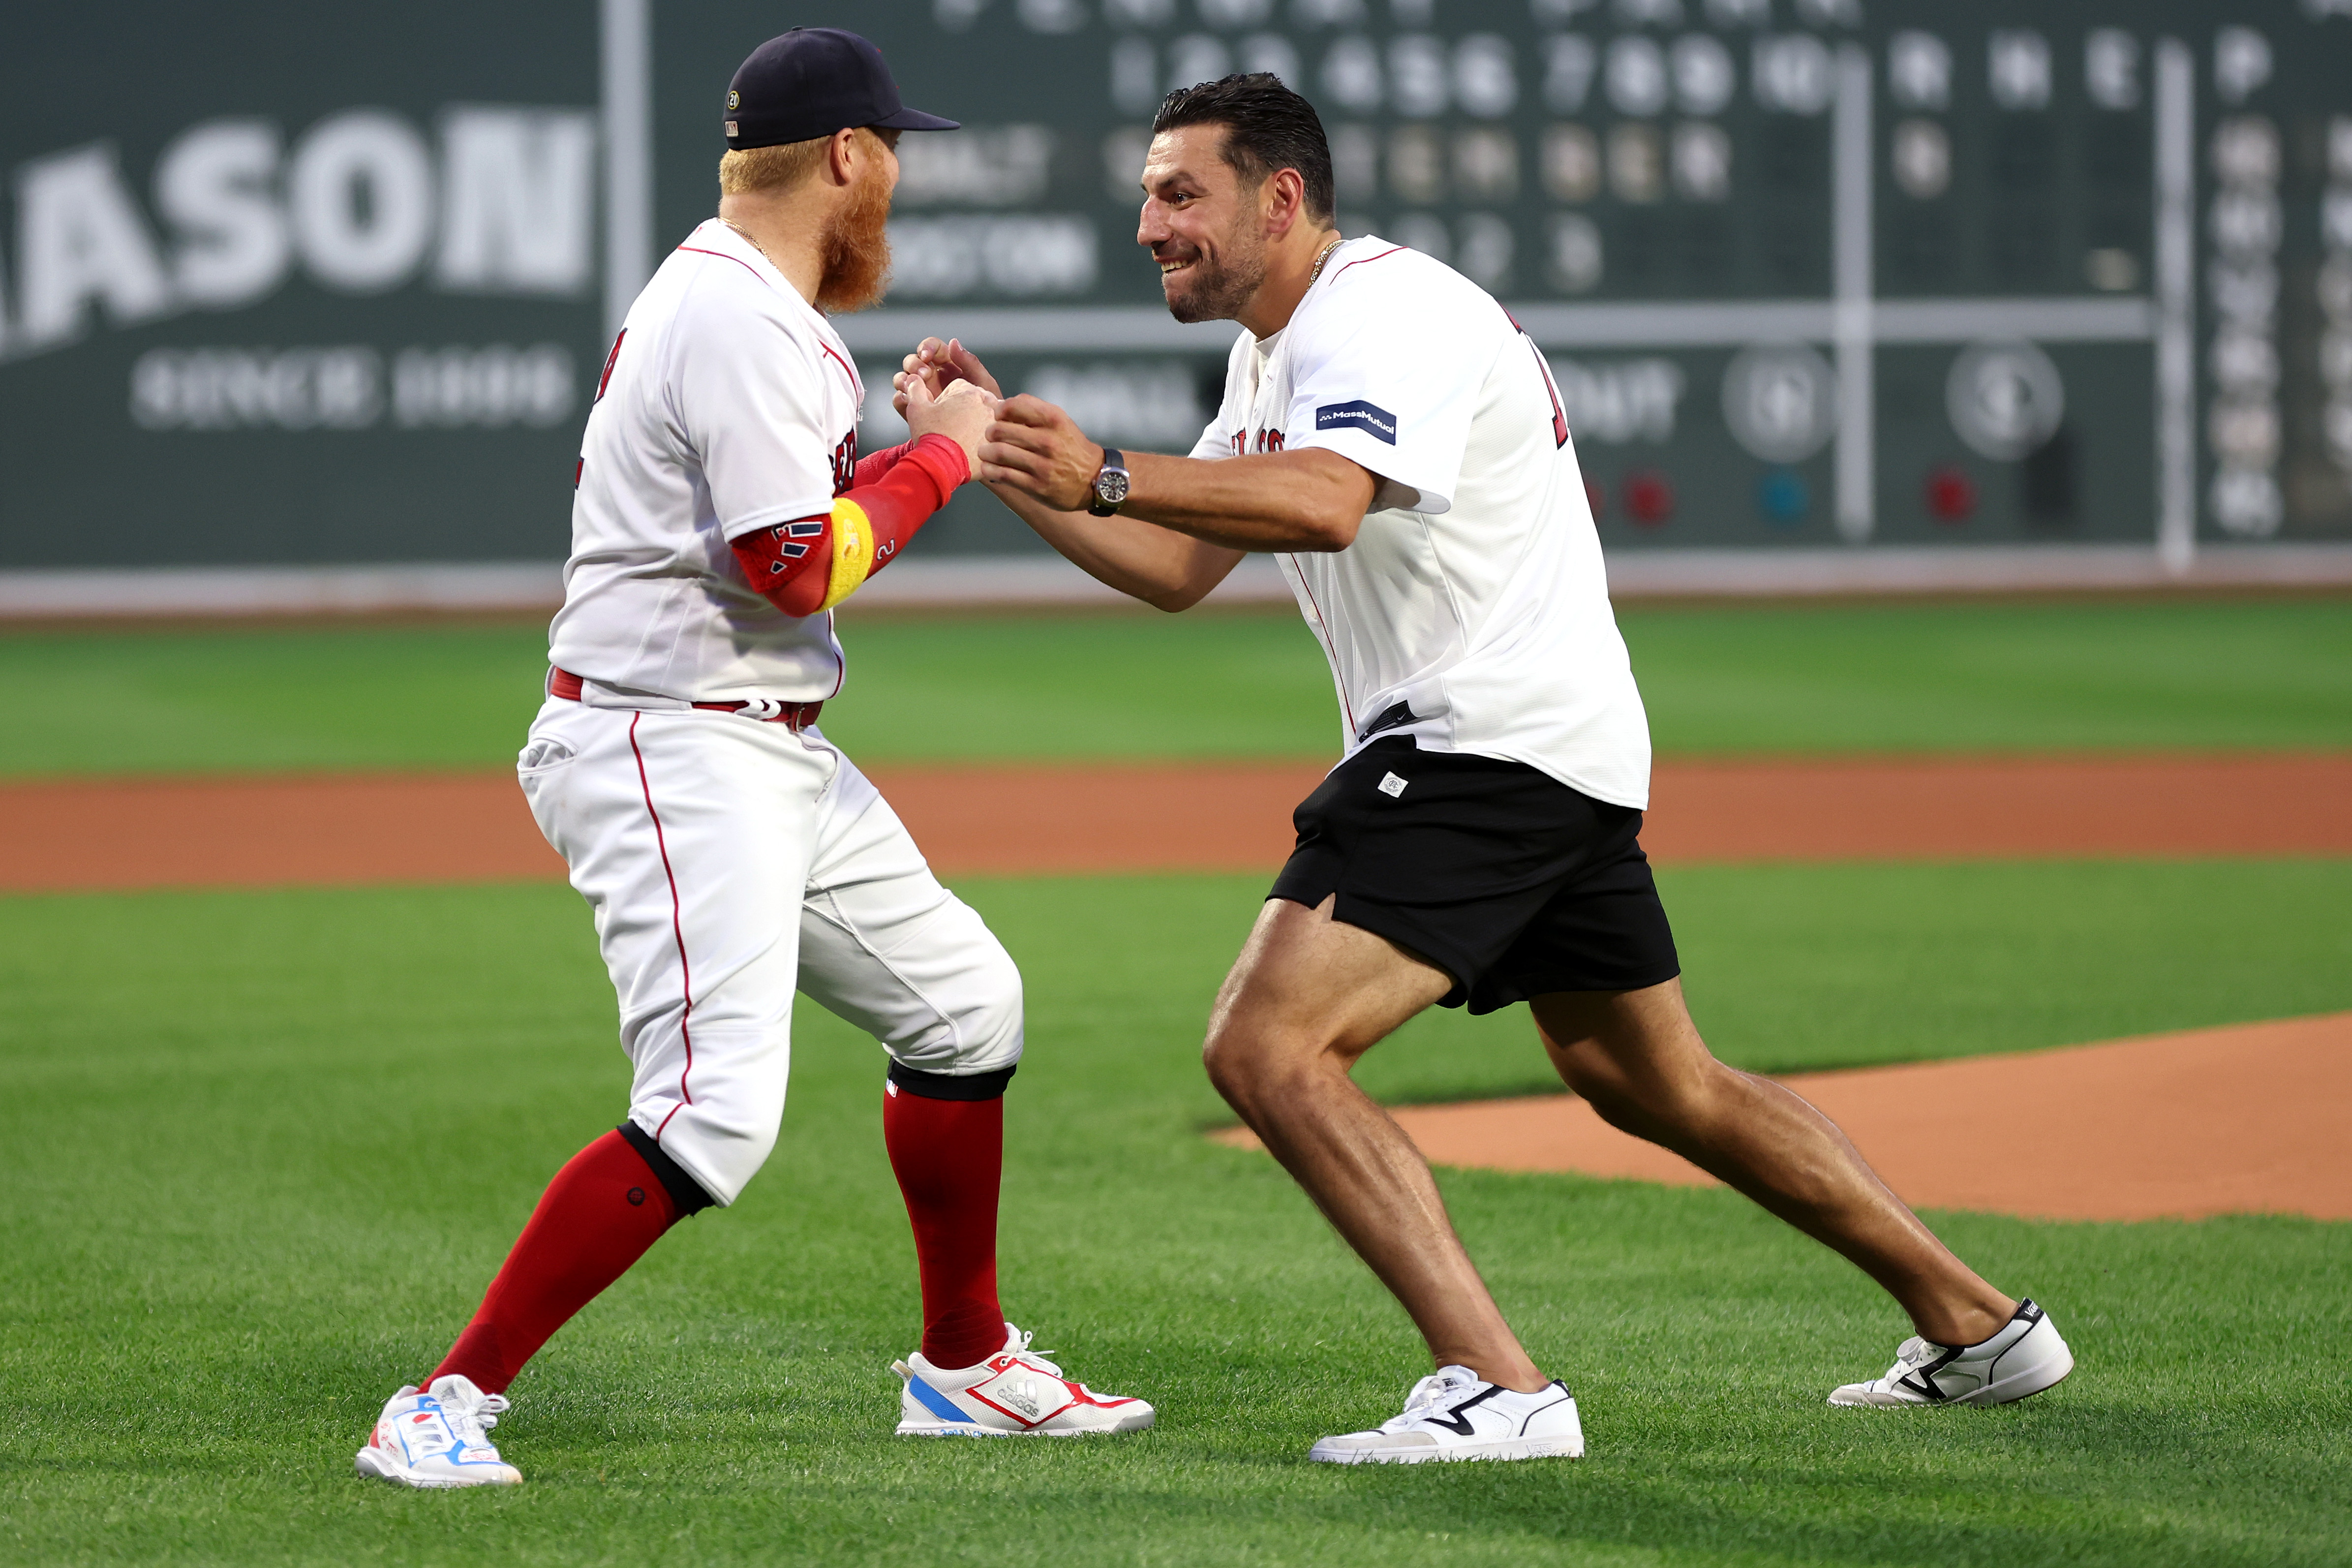 Bruins' Milan Lucic throws out first pitch at Red Sox, puts up the